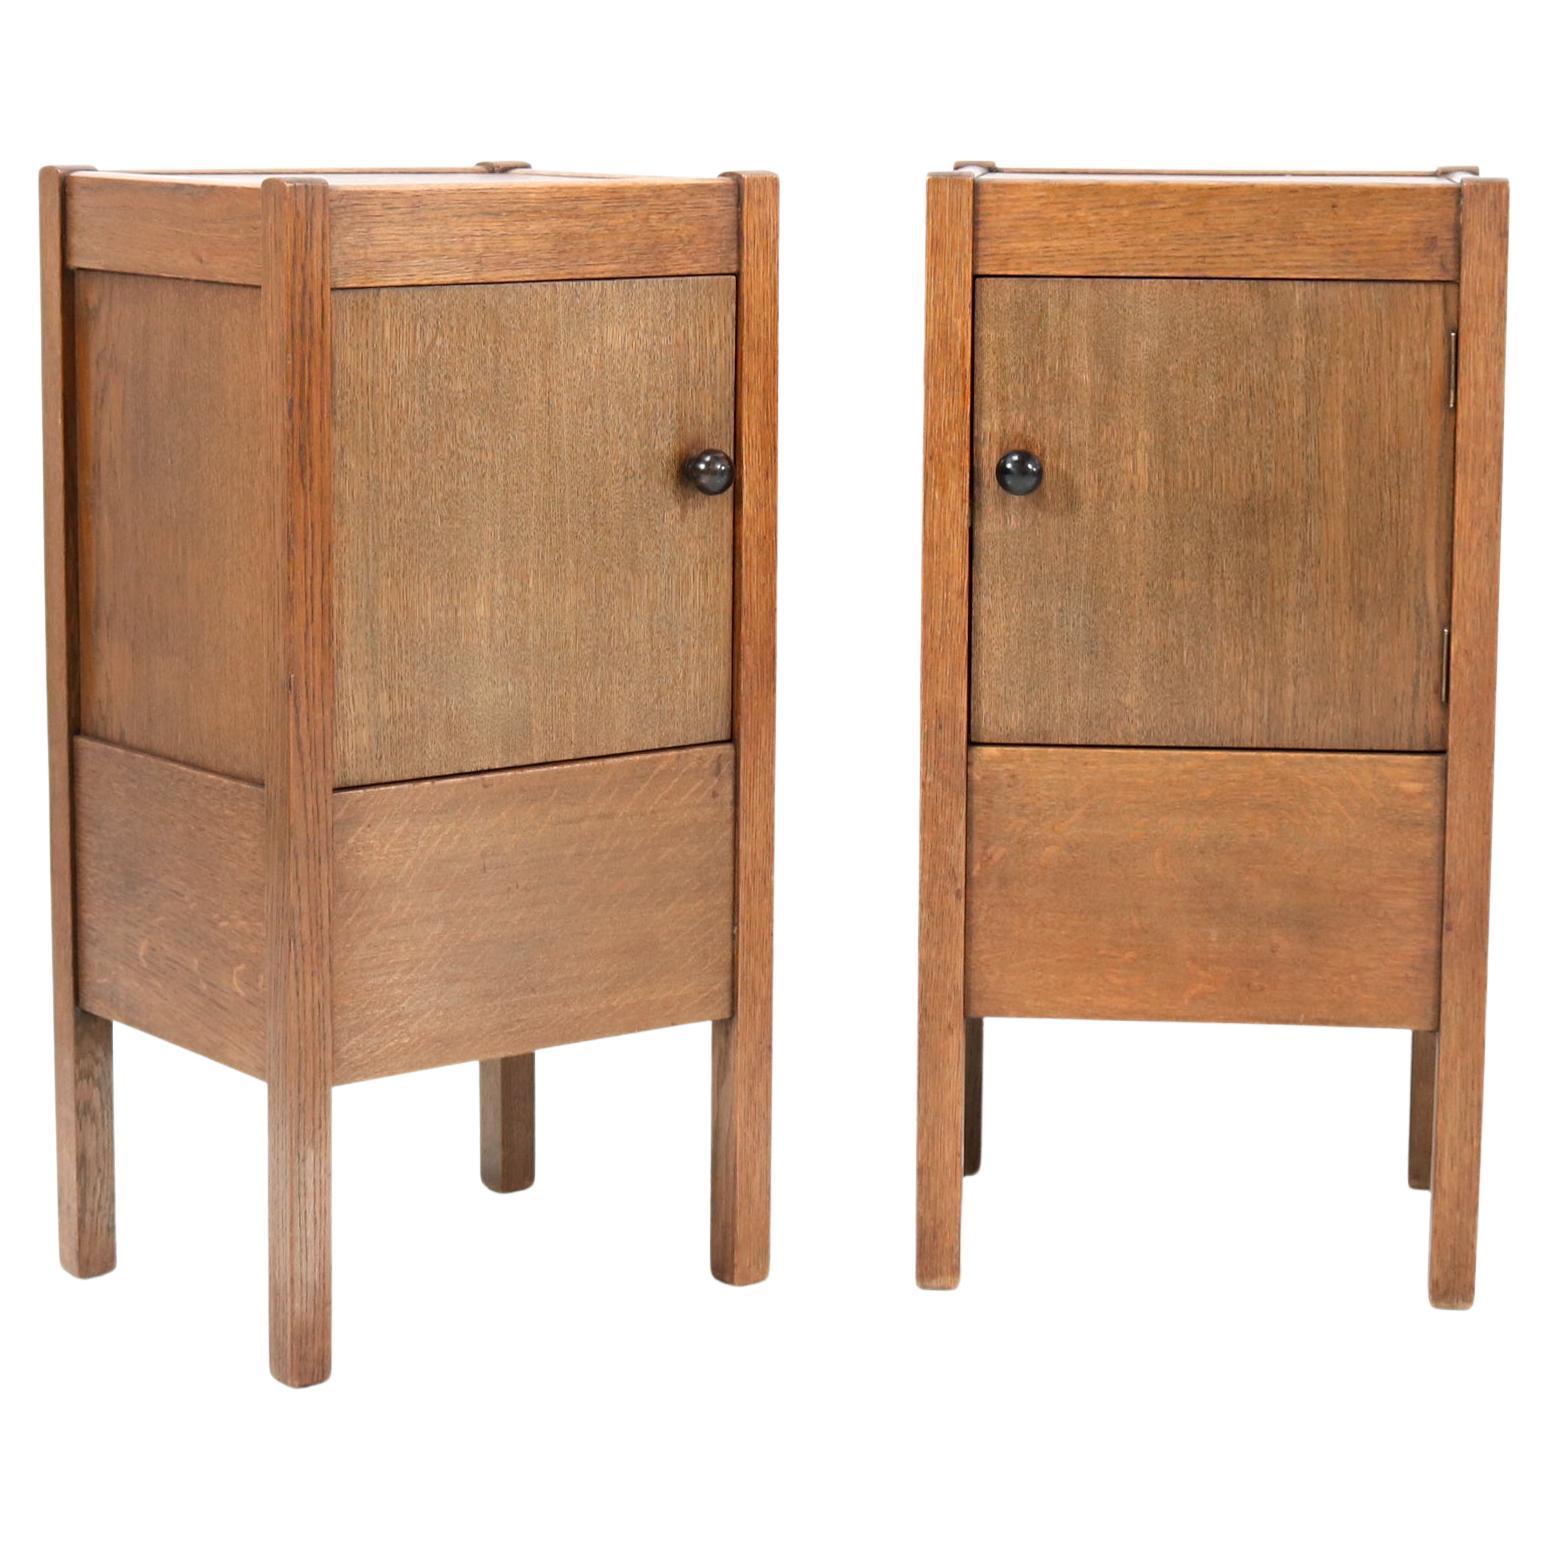 Two Oak Art Deco Nightstands by J.A. Muntendam for L.O.V. Oosterbeek, 1920s